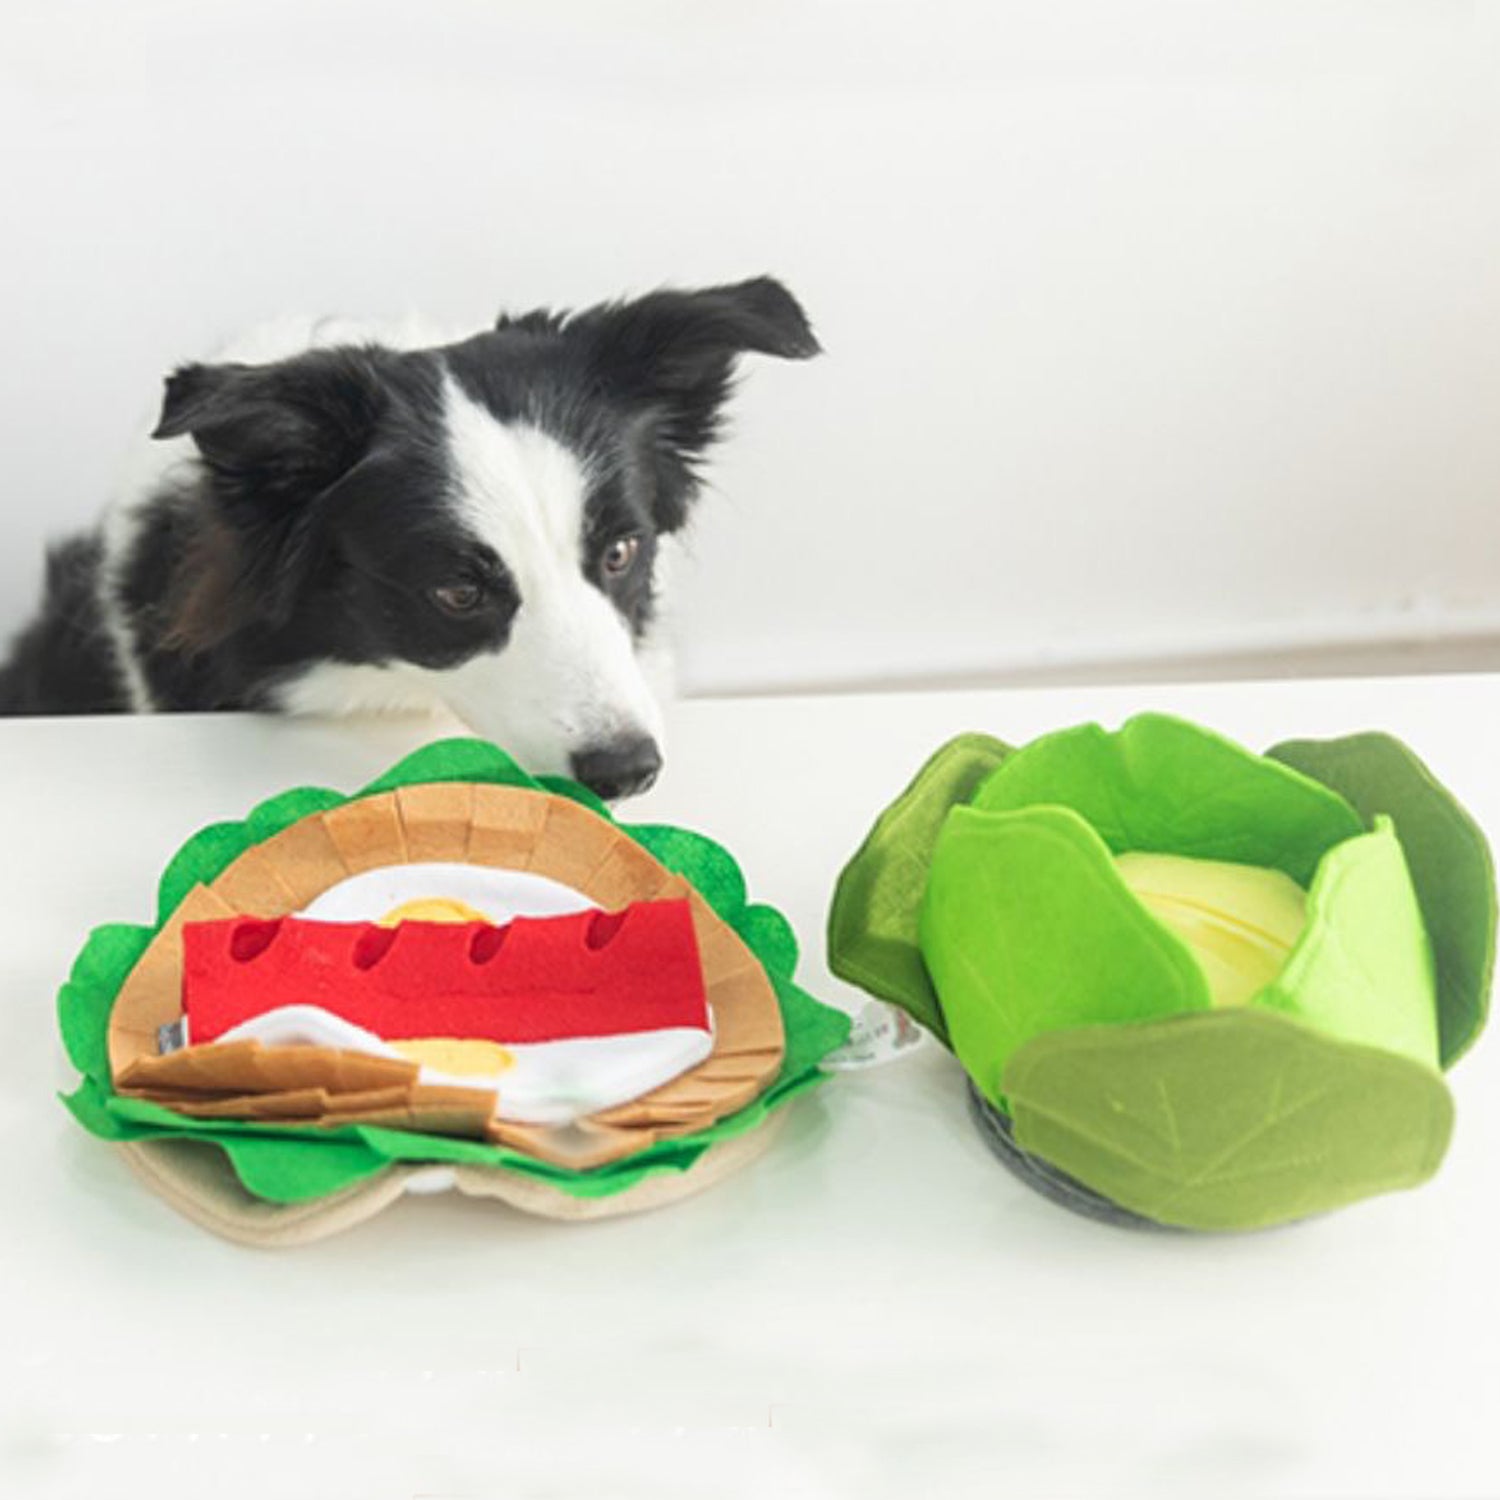 Smiley Breakfast Plate Snuffle Dog Toy